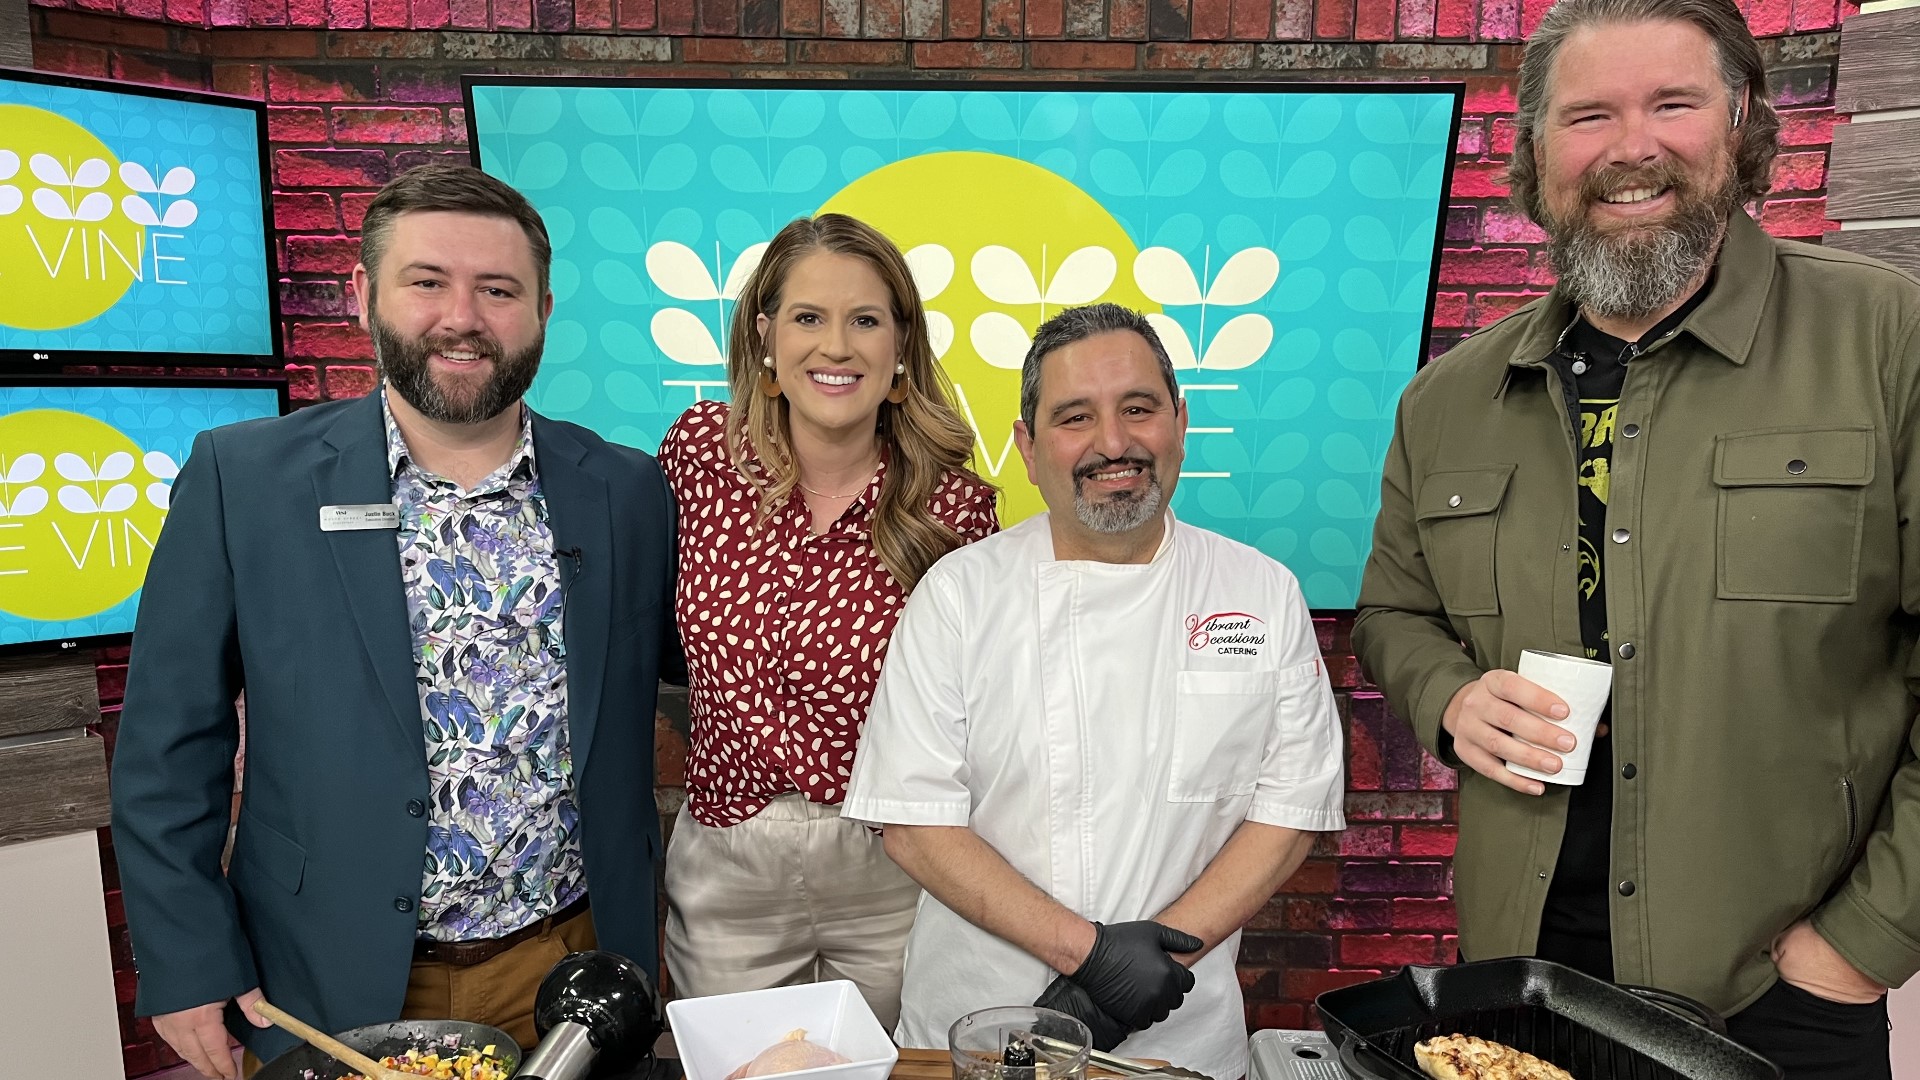 Vibrant Occasion Catering will provide dinner for the upcoming Wolfe Street Foundation Red Carpet Recovery Gala. He shares how he makes one of the dishes featured.